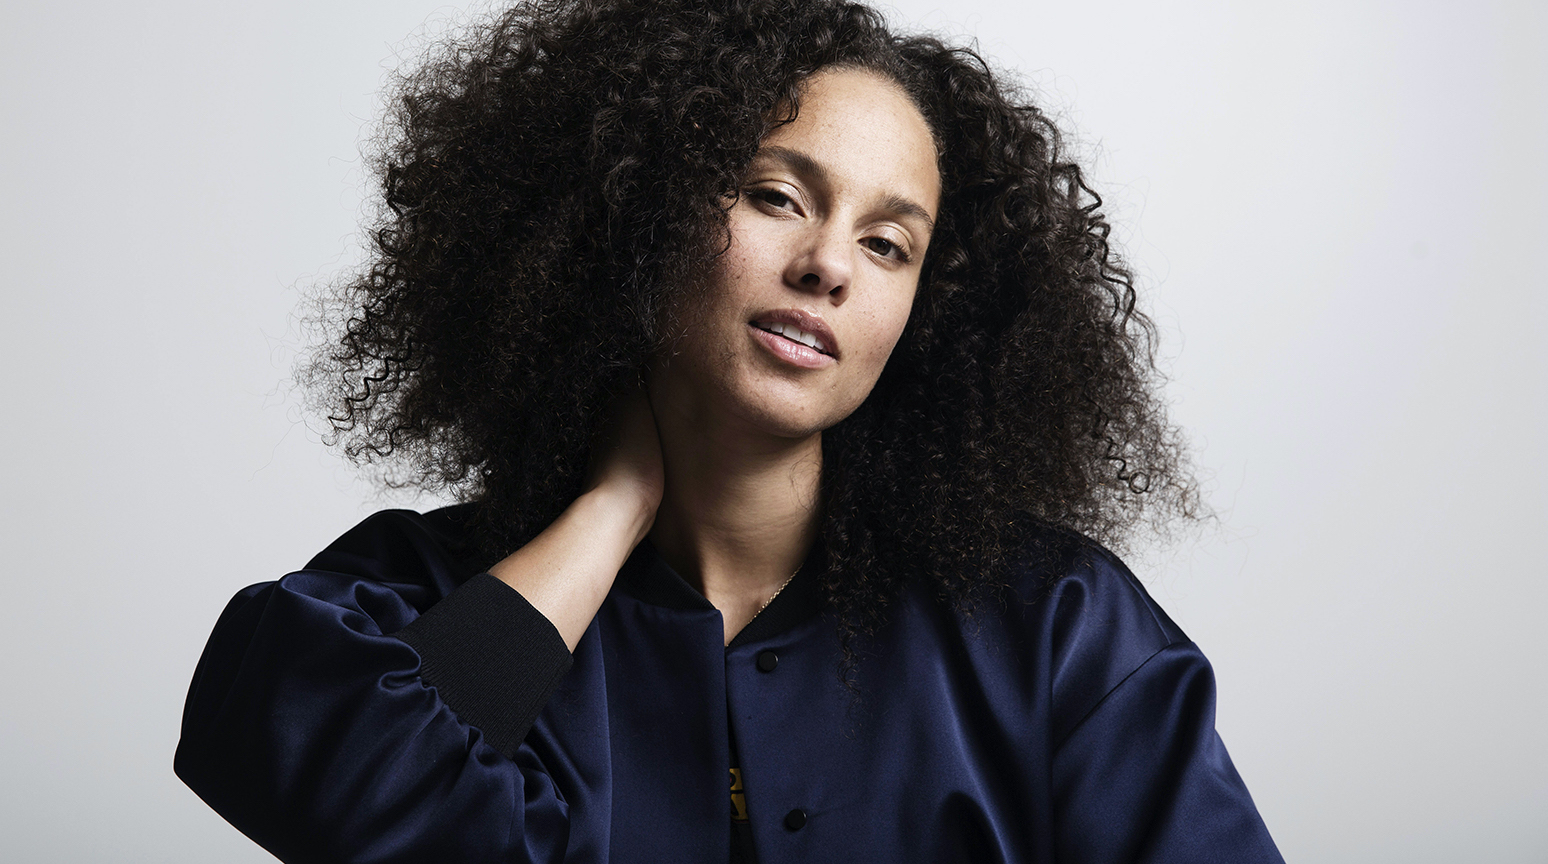 Alicia Keys Photo by Taylor Jewell/Invision/AP